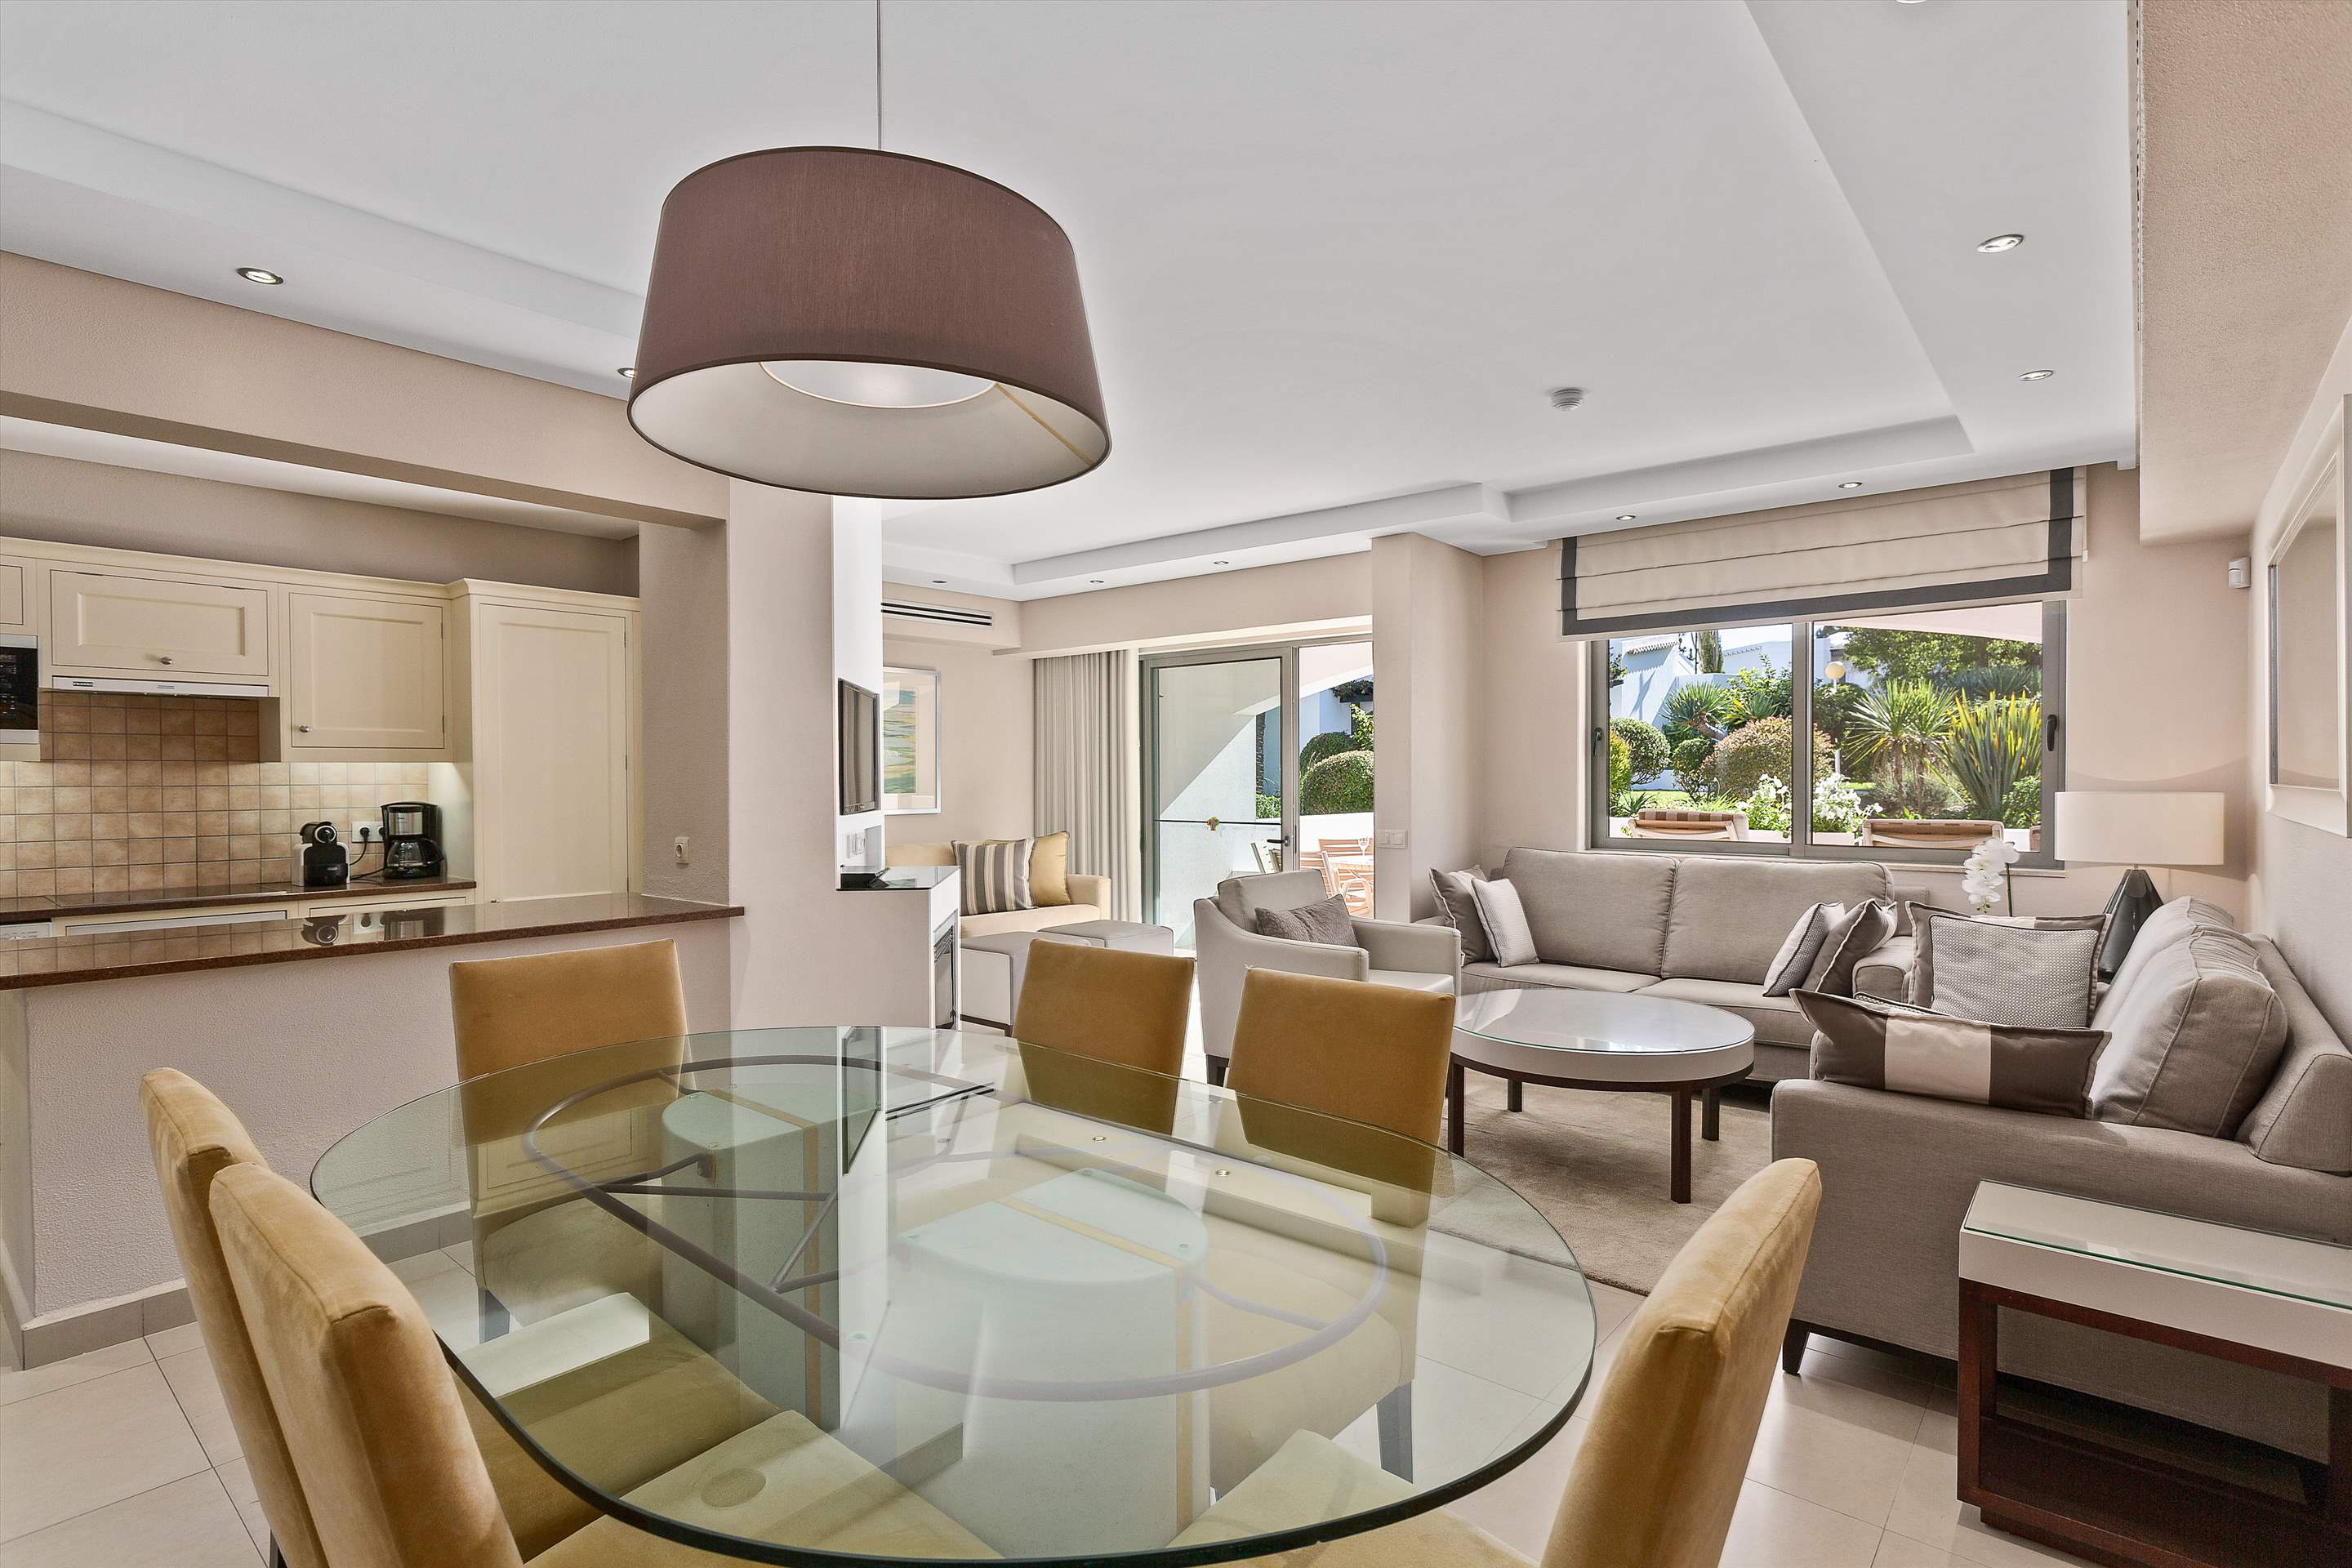 Four Seasons Country Club 2 bed, Superior - Thursday Arrival, 2 bedroom apartment in Four Seasons Country Club, Algarve Photo #5